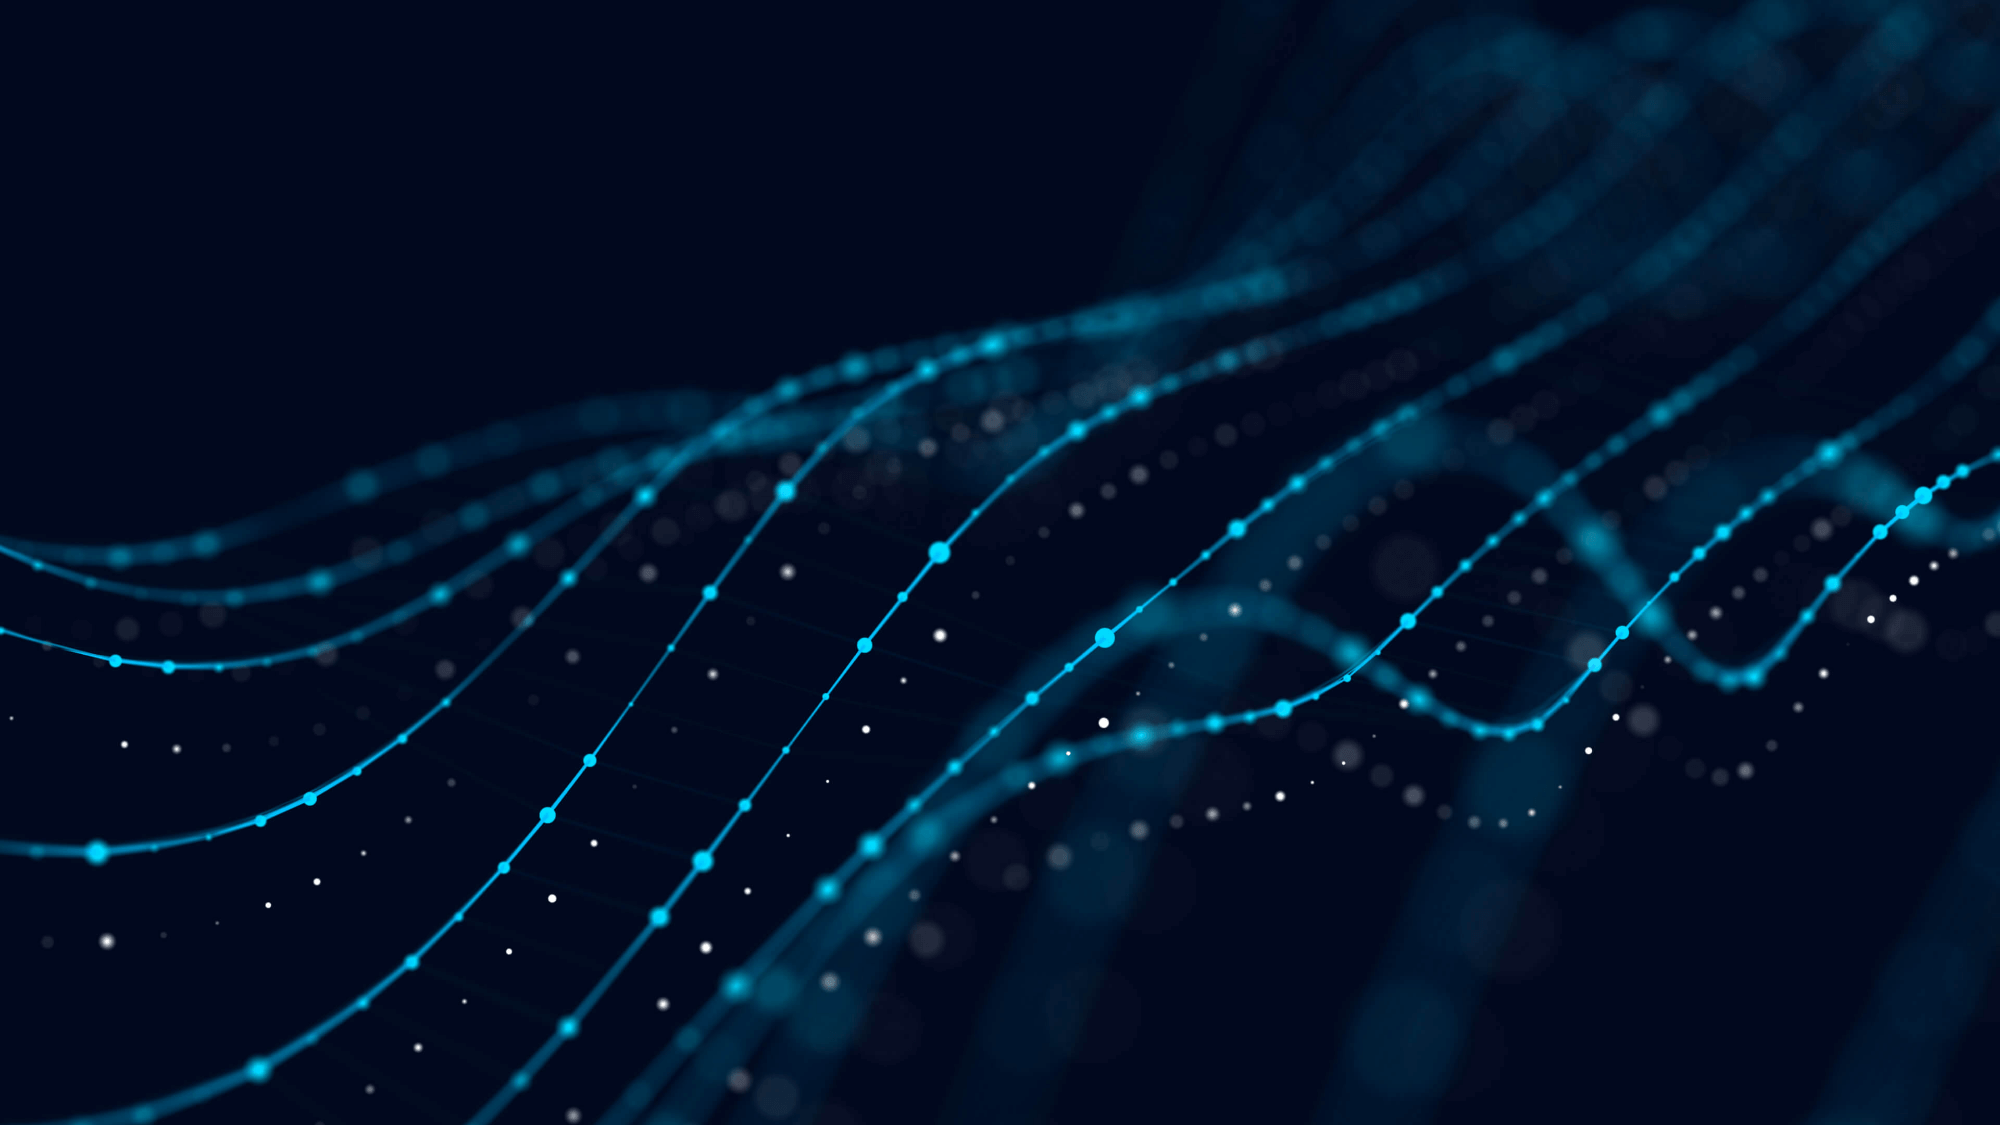 Abstract image of flowing lines composed of blue dots connected by thin lines on a dark blue background, representing an introduction to IPFS or technological concept.